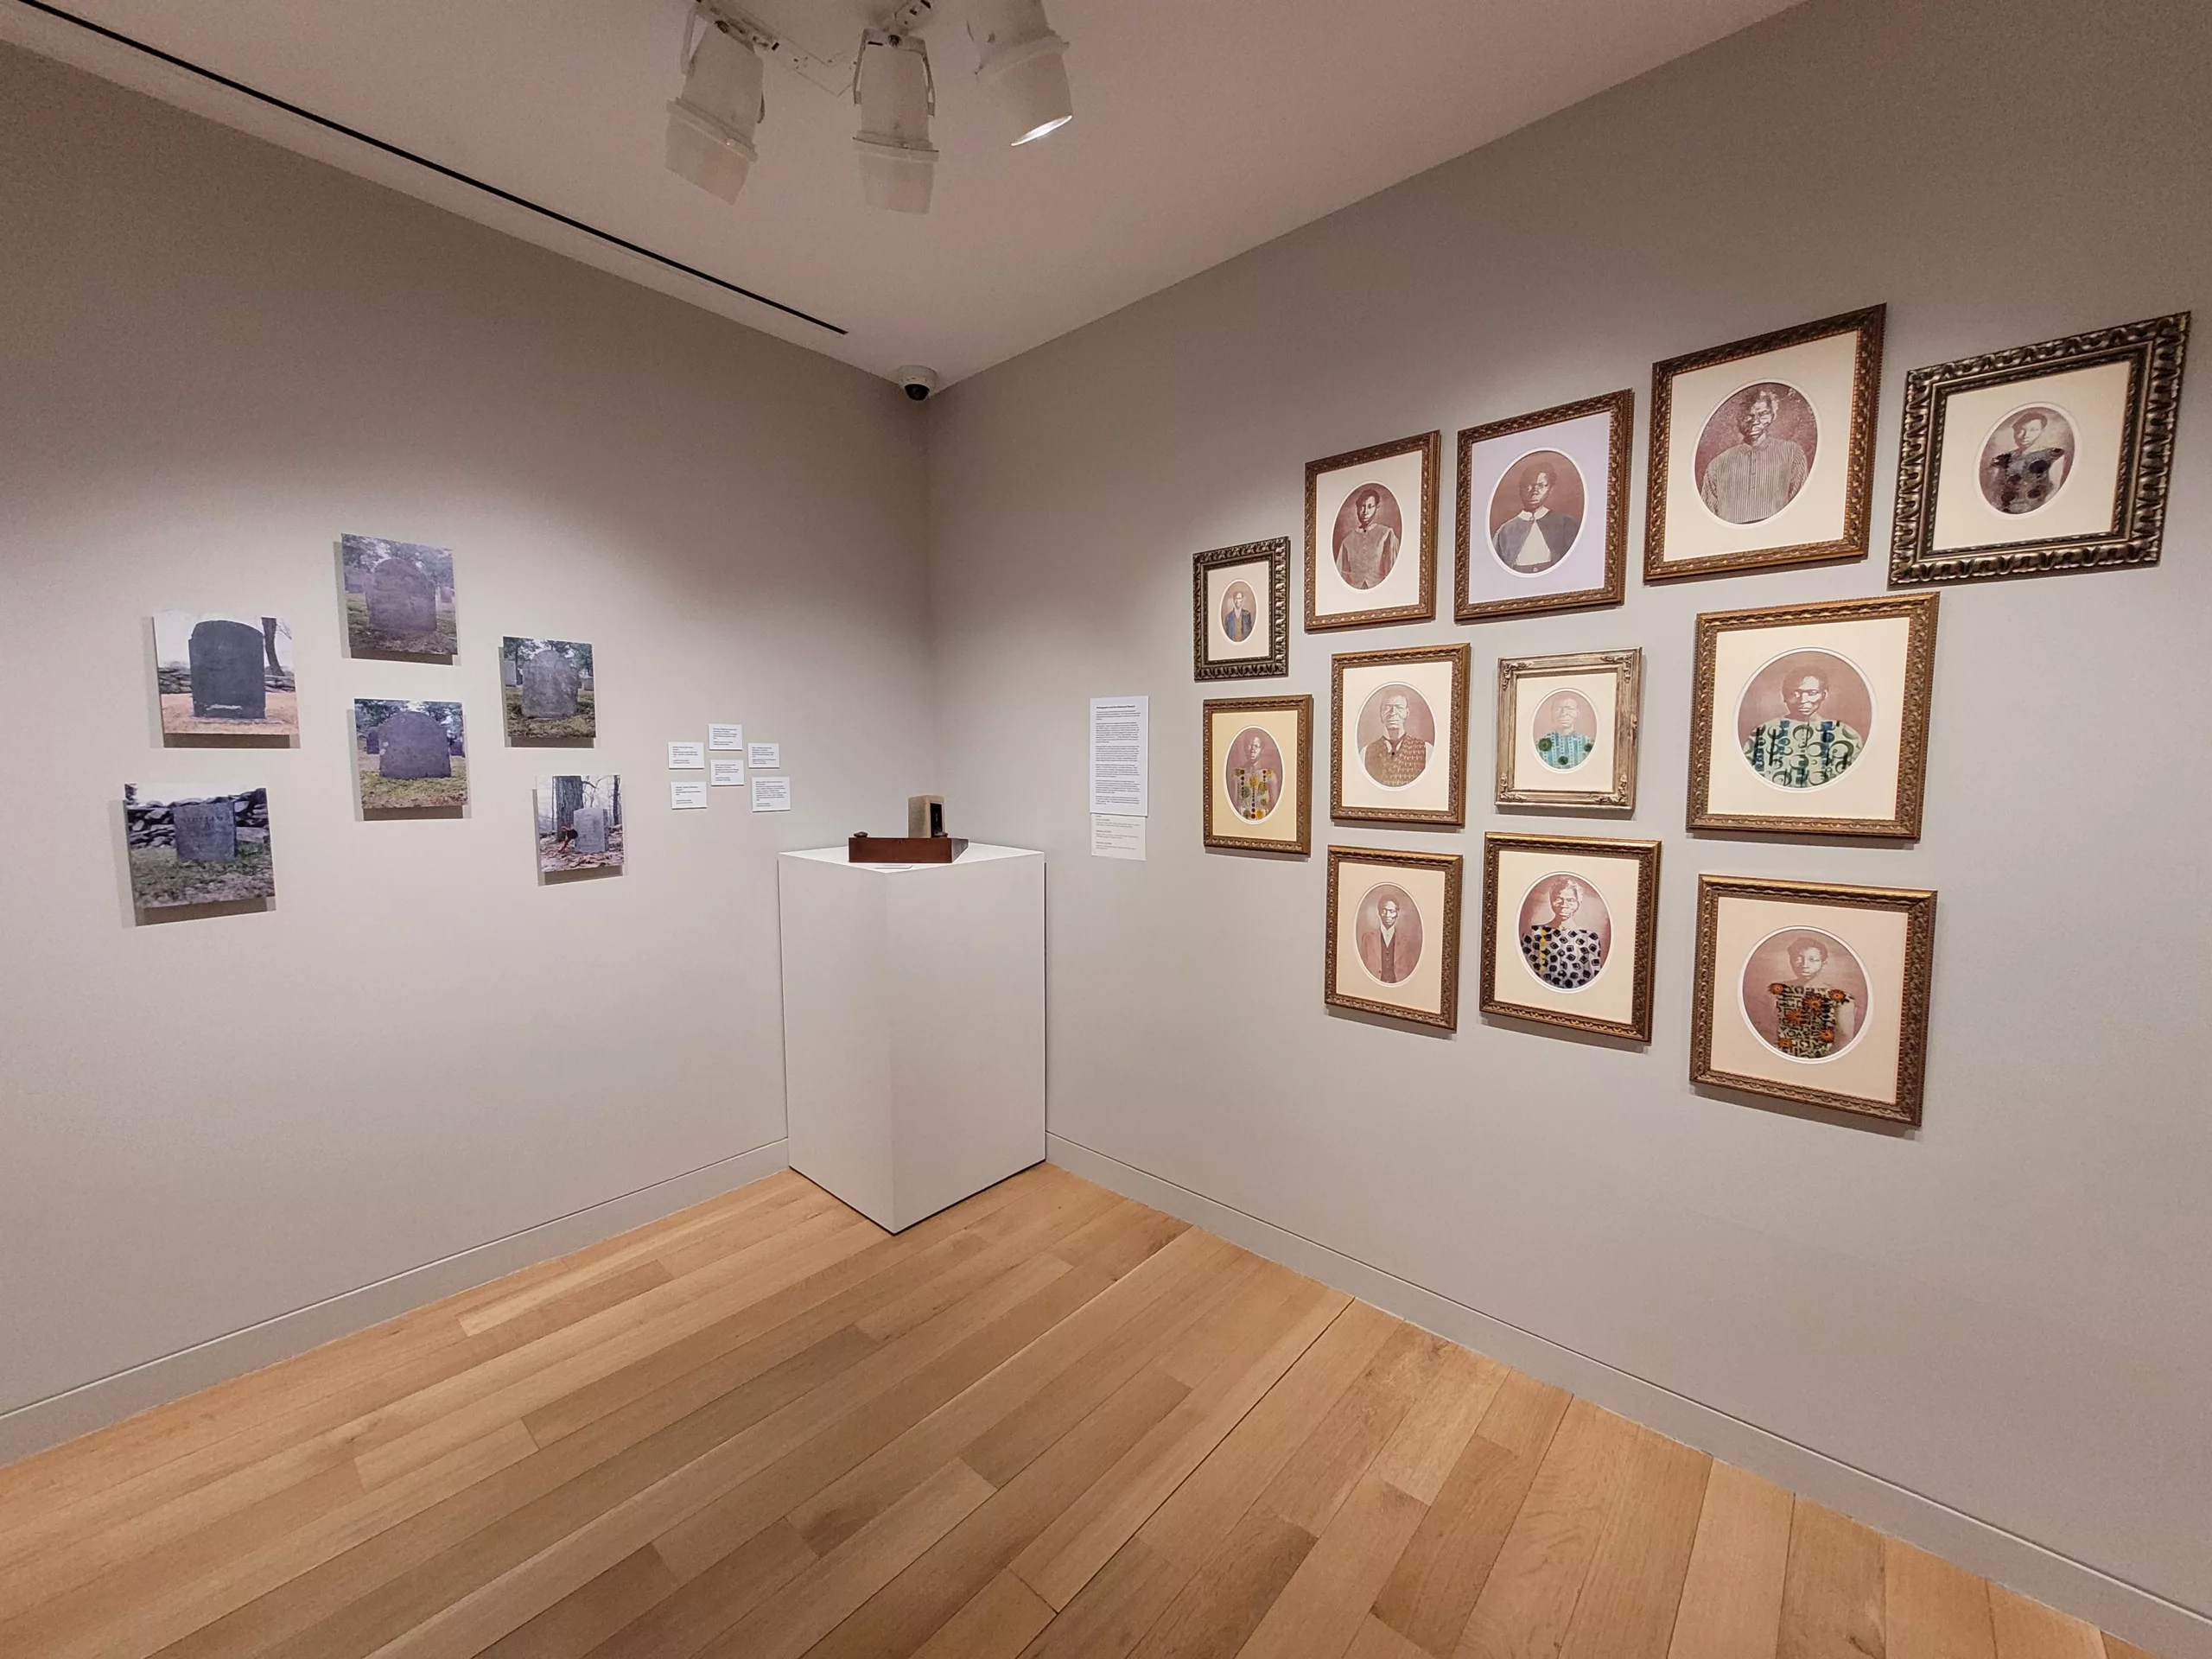 Photograph of a gallery installation with grey walls. There are photos of gravestones on the left wall, a white pedestal in between, and framed portraits on the right wall.